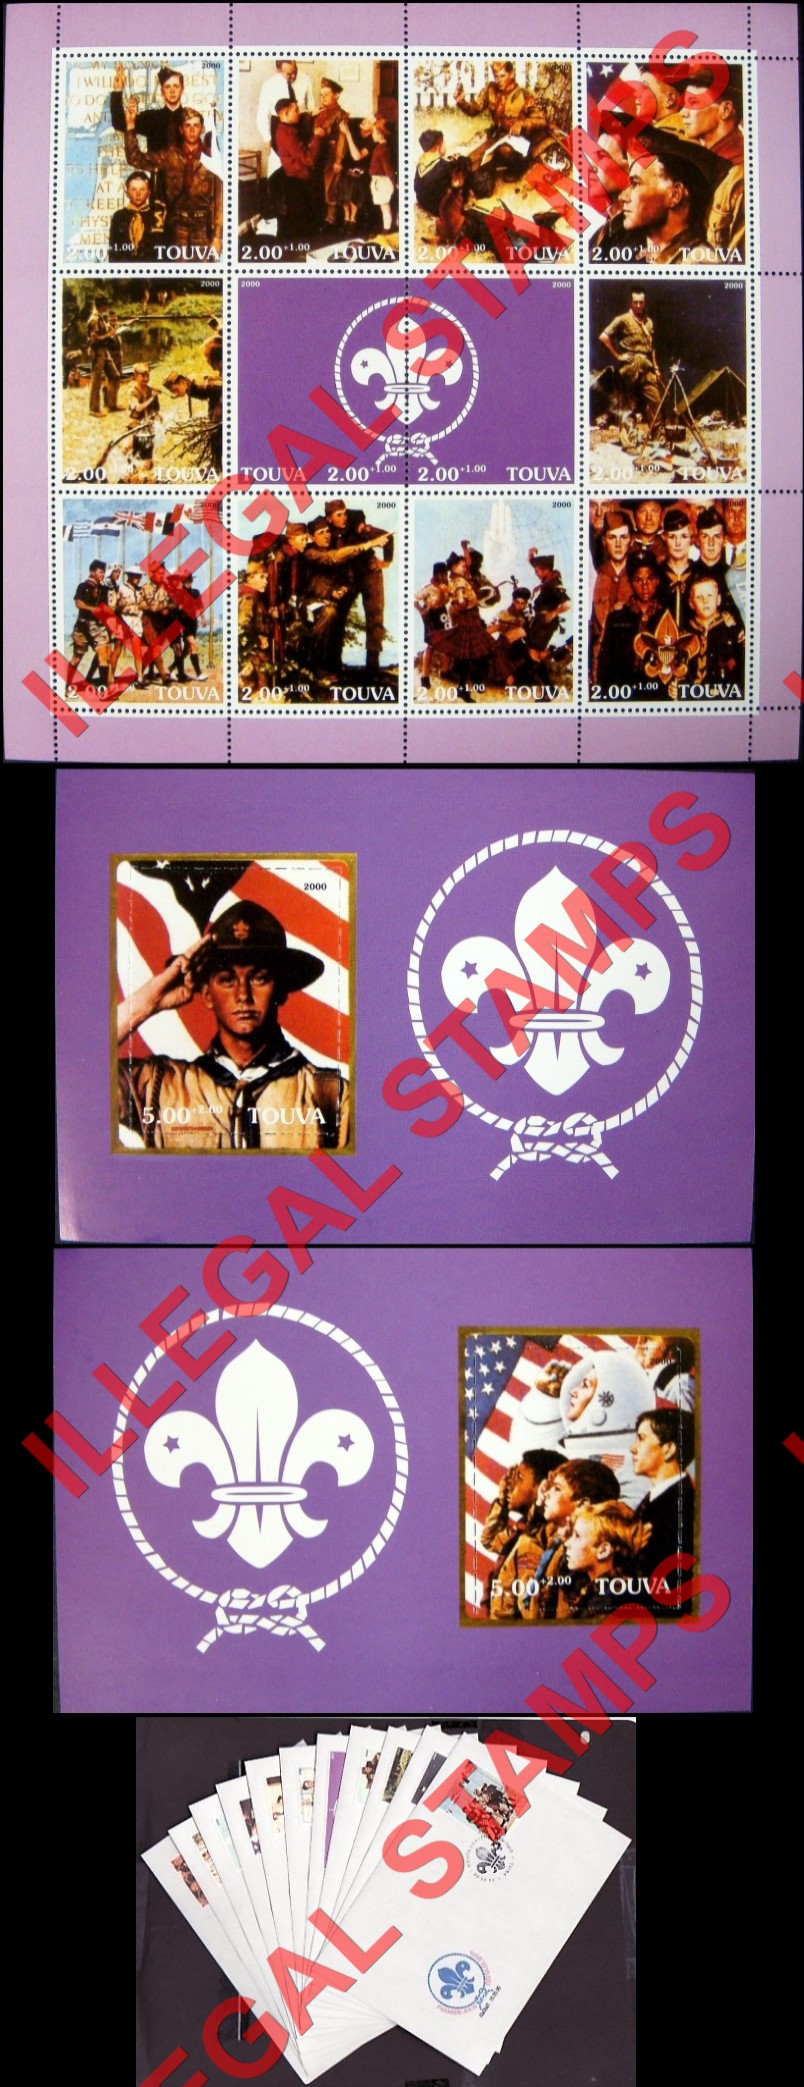 Republic of Tuva 2000 Scouts Counterfeit Illegal Stamps (Part 1)